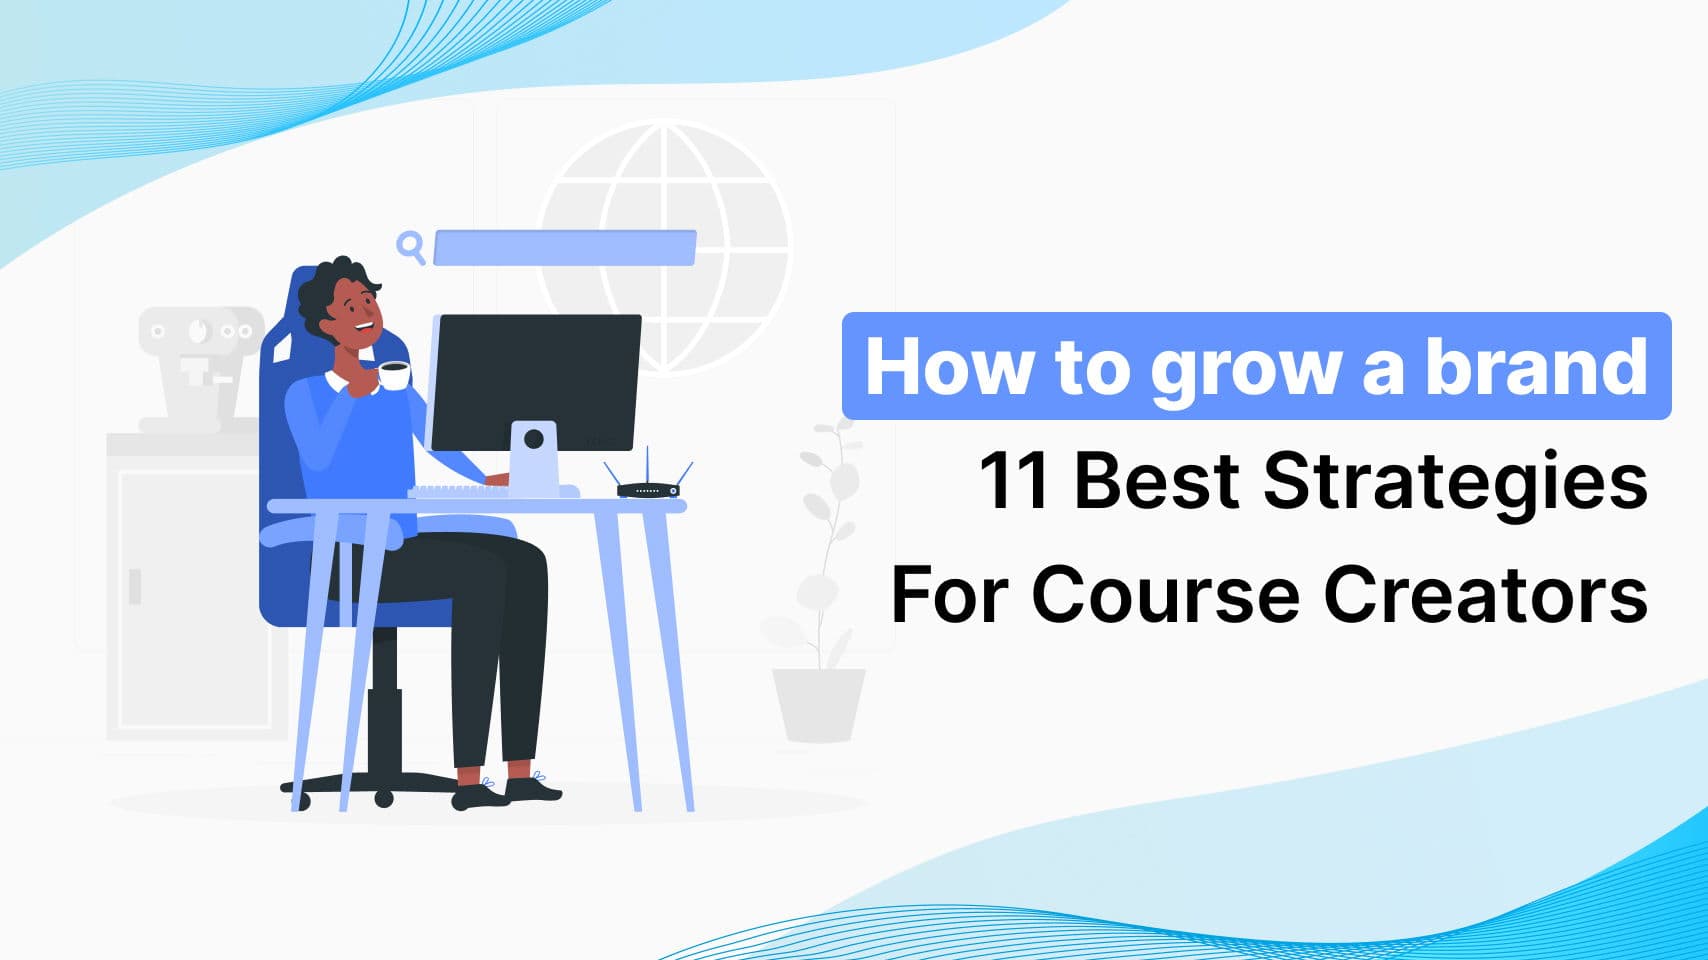 How to Grow a Brand: 11 Best Strategies for Course Creators